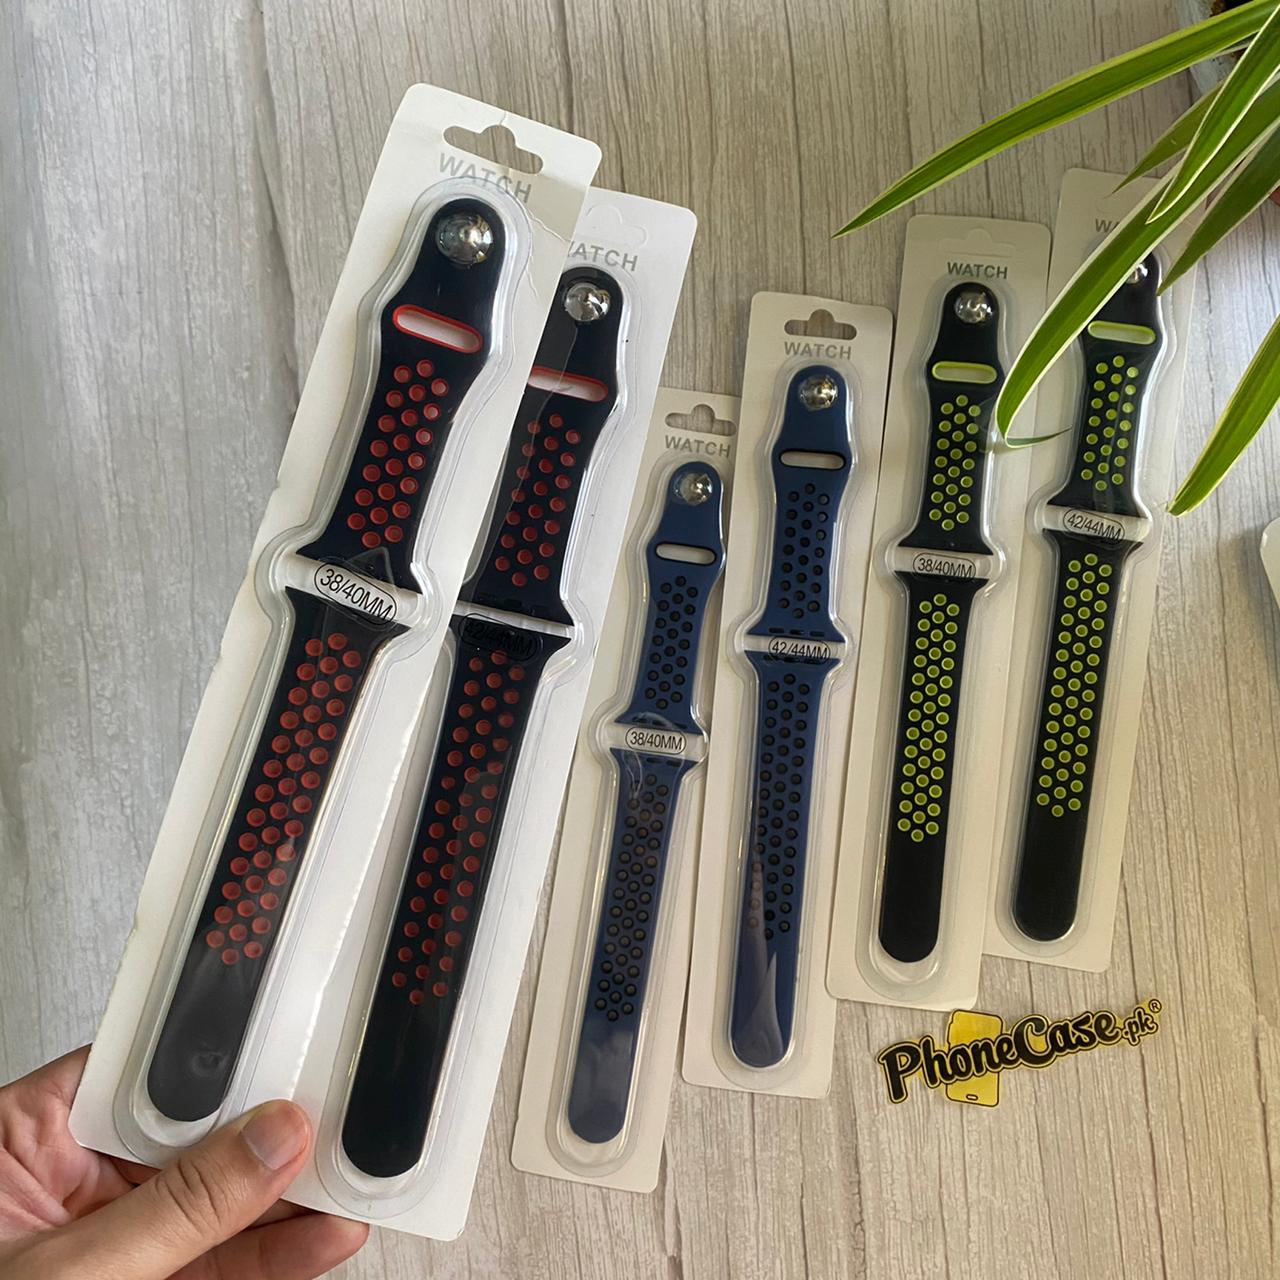 Nike Sports apple watch Band Strap for all series